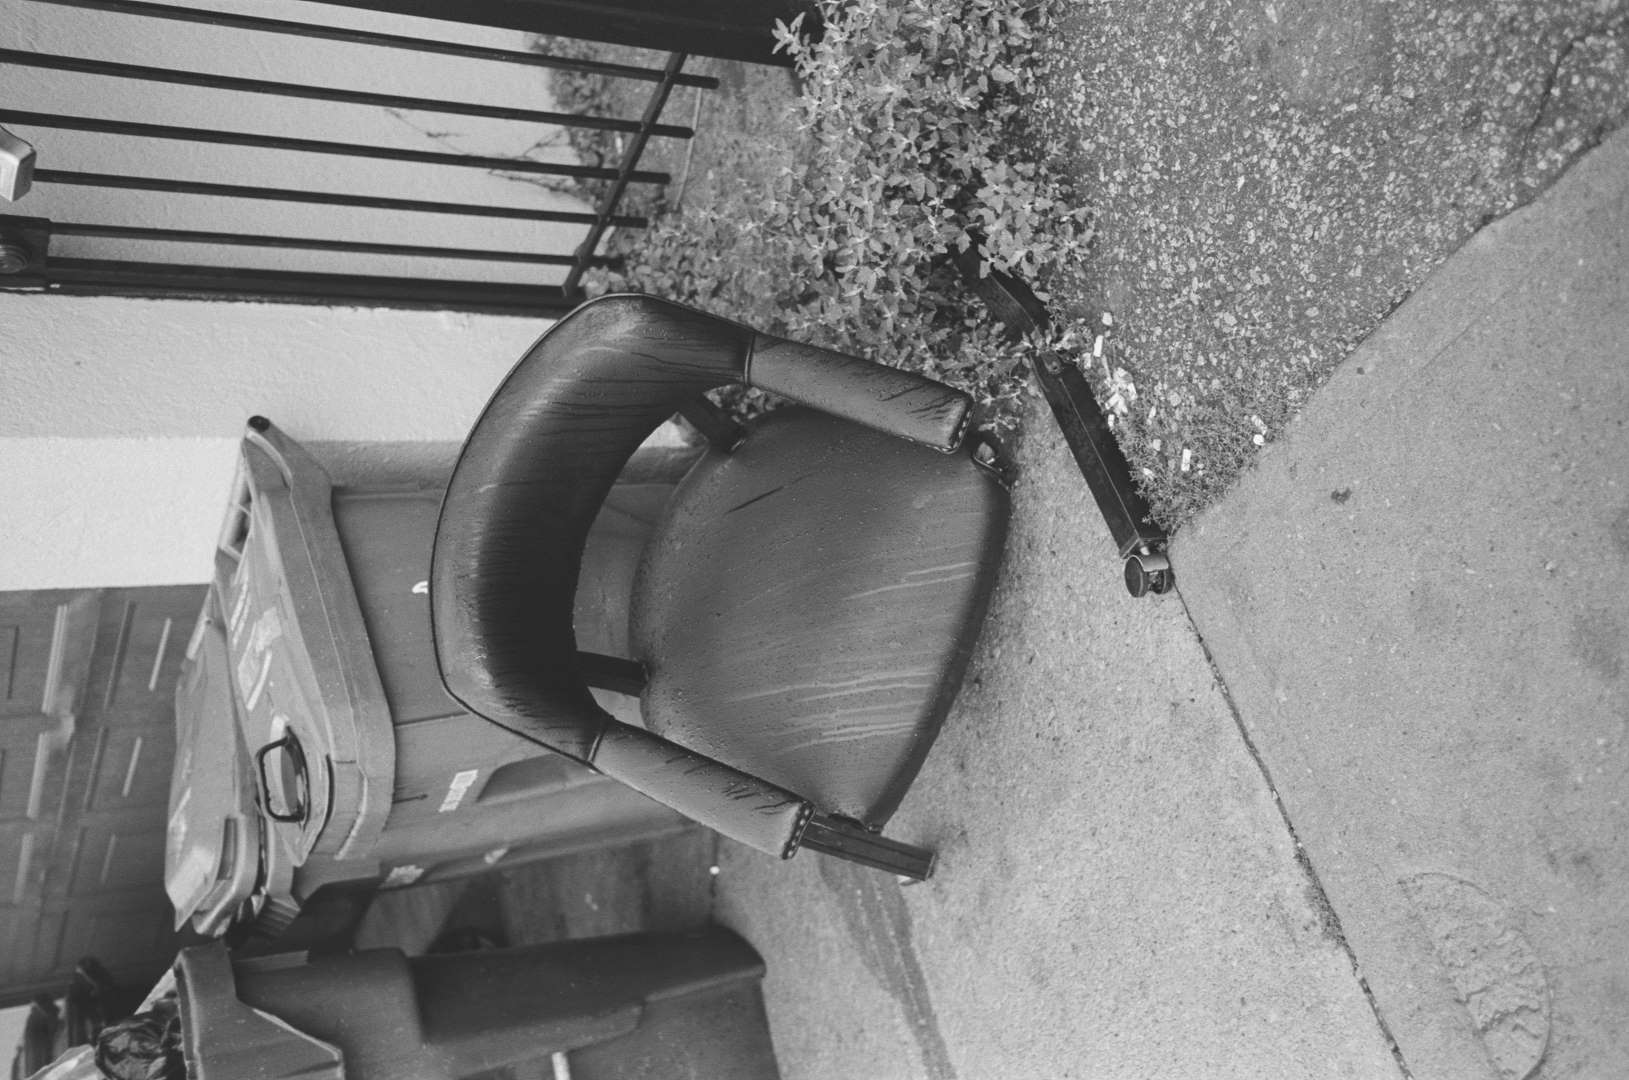 A black and white photograph of a broken leather armchair left out on the sidewalk. The leather is dripping with the morning dew.